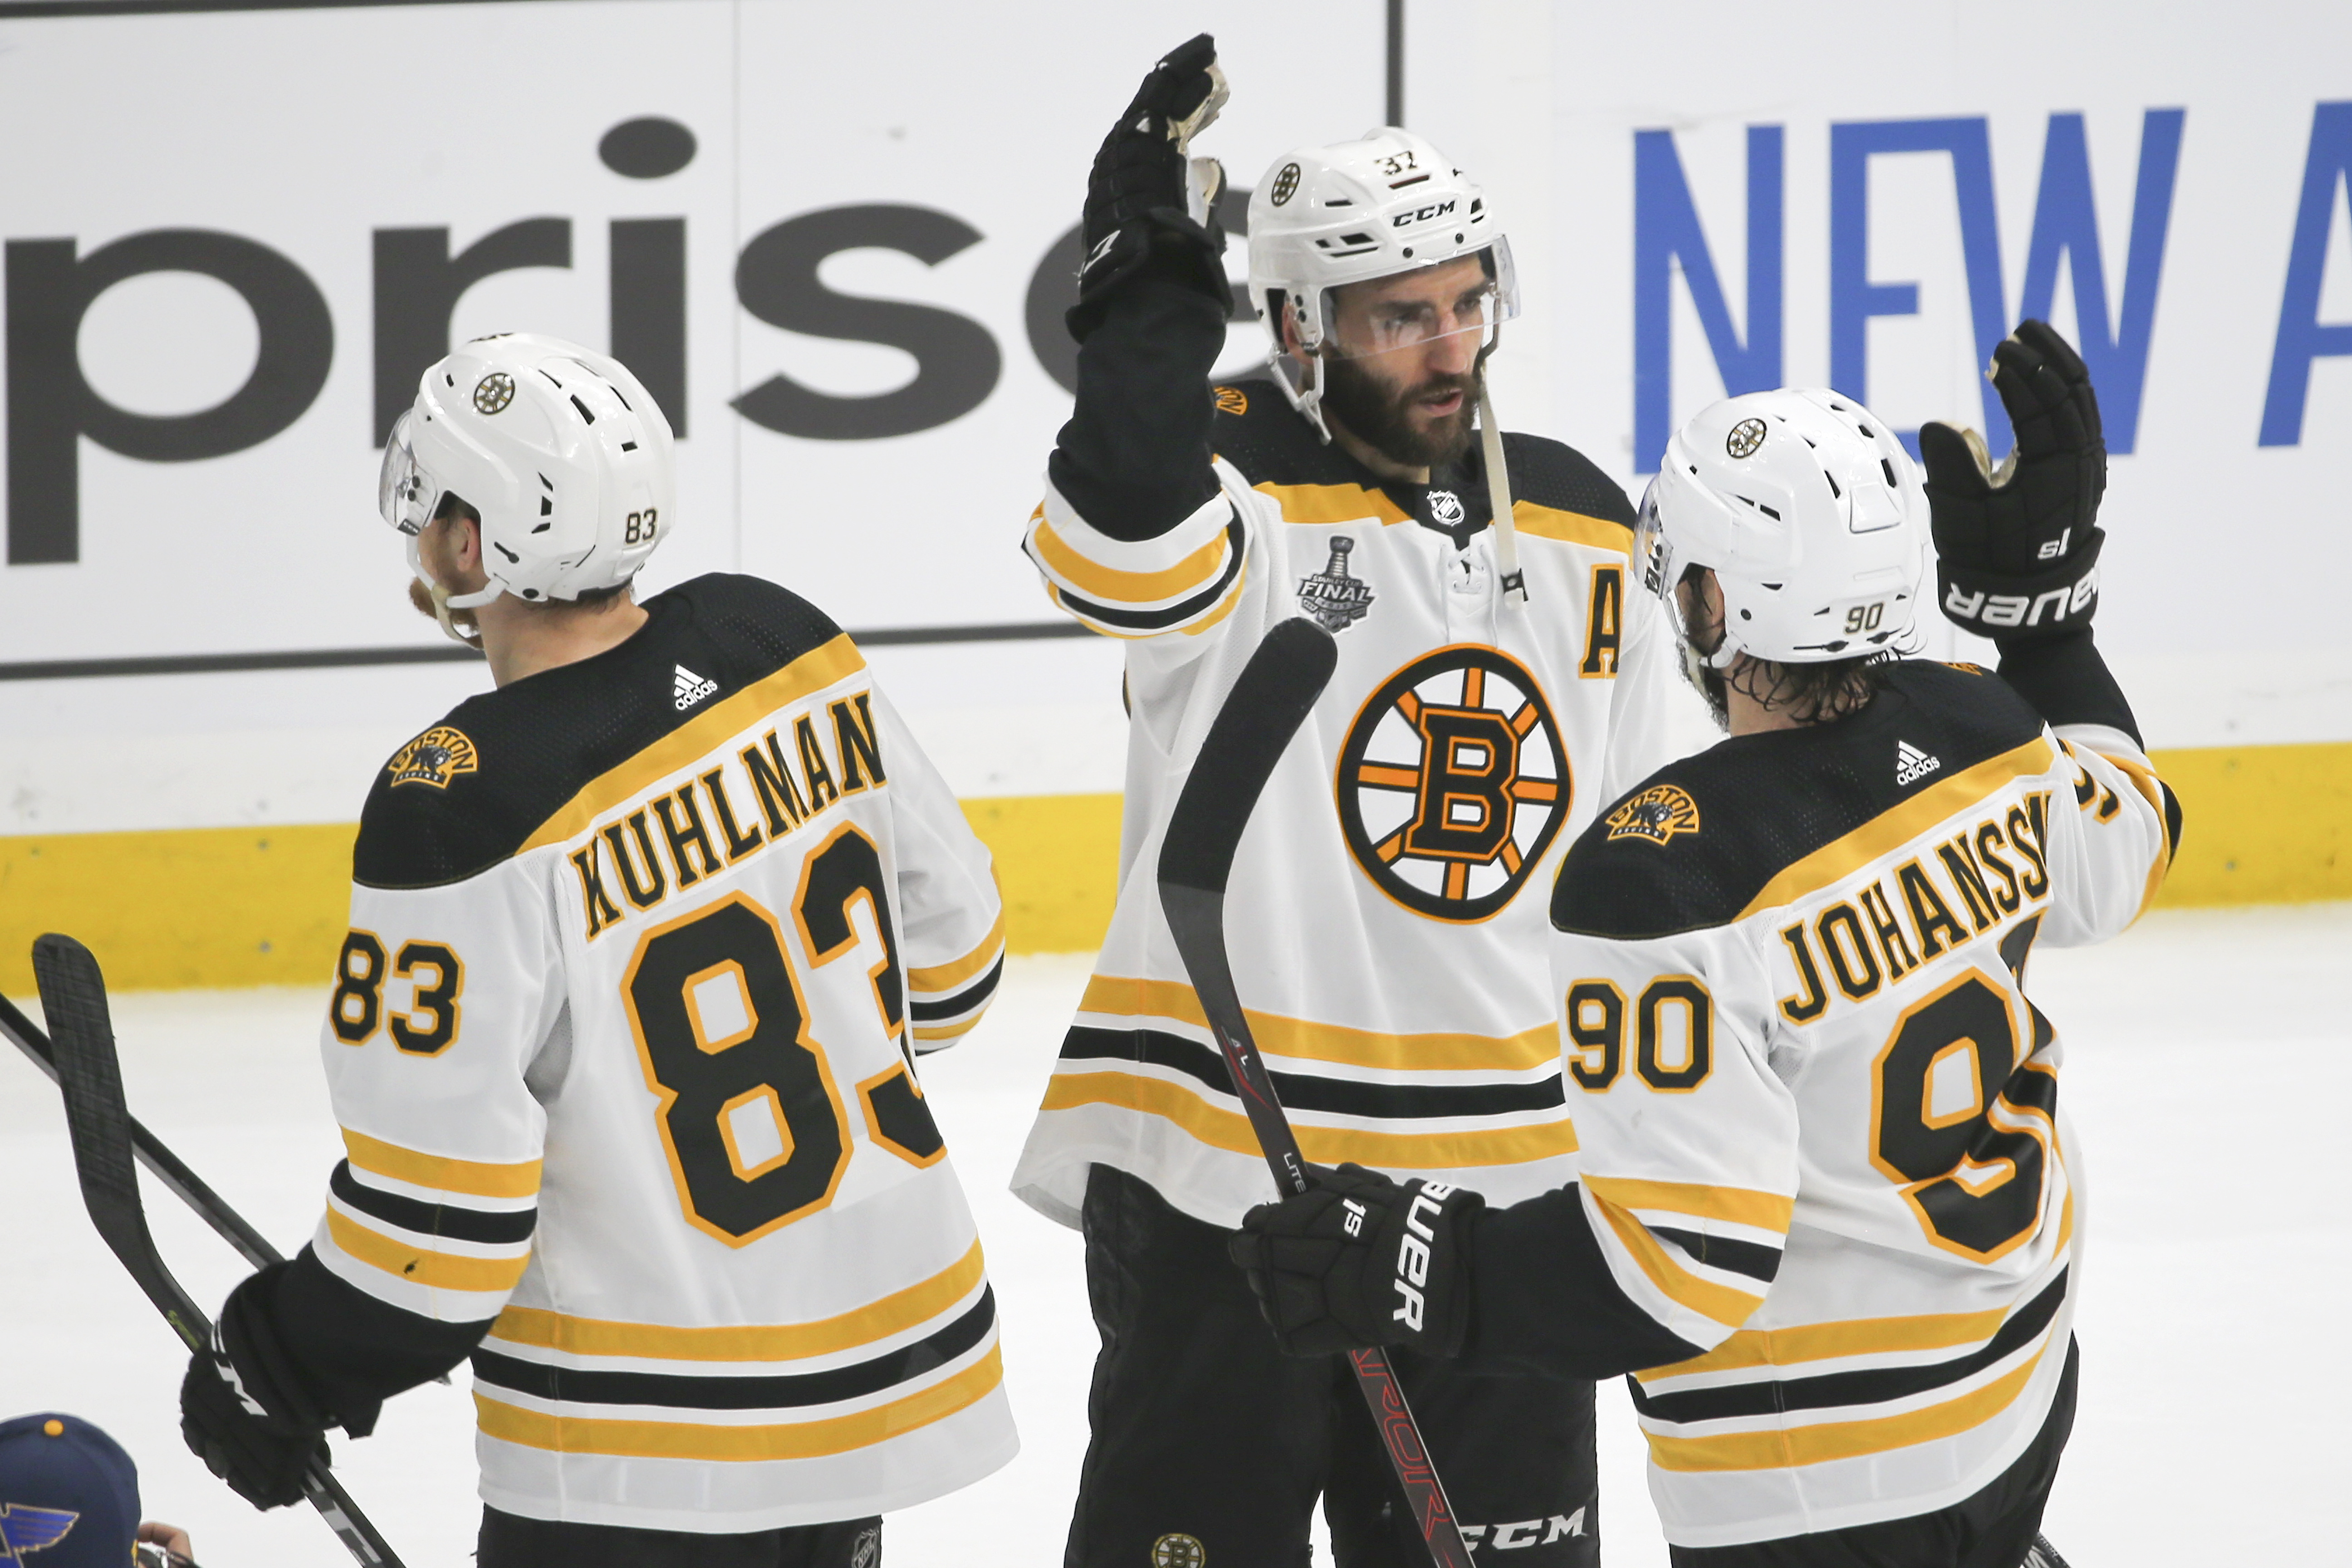 Bruins' consistency faces final test in Game 7 vs. Blues